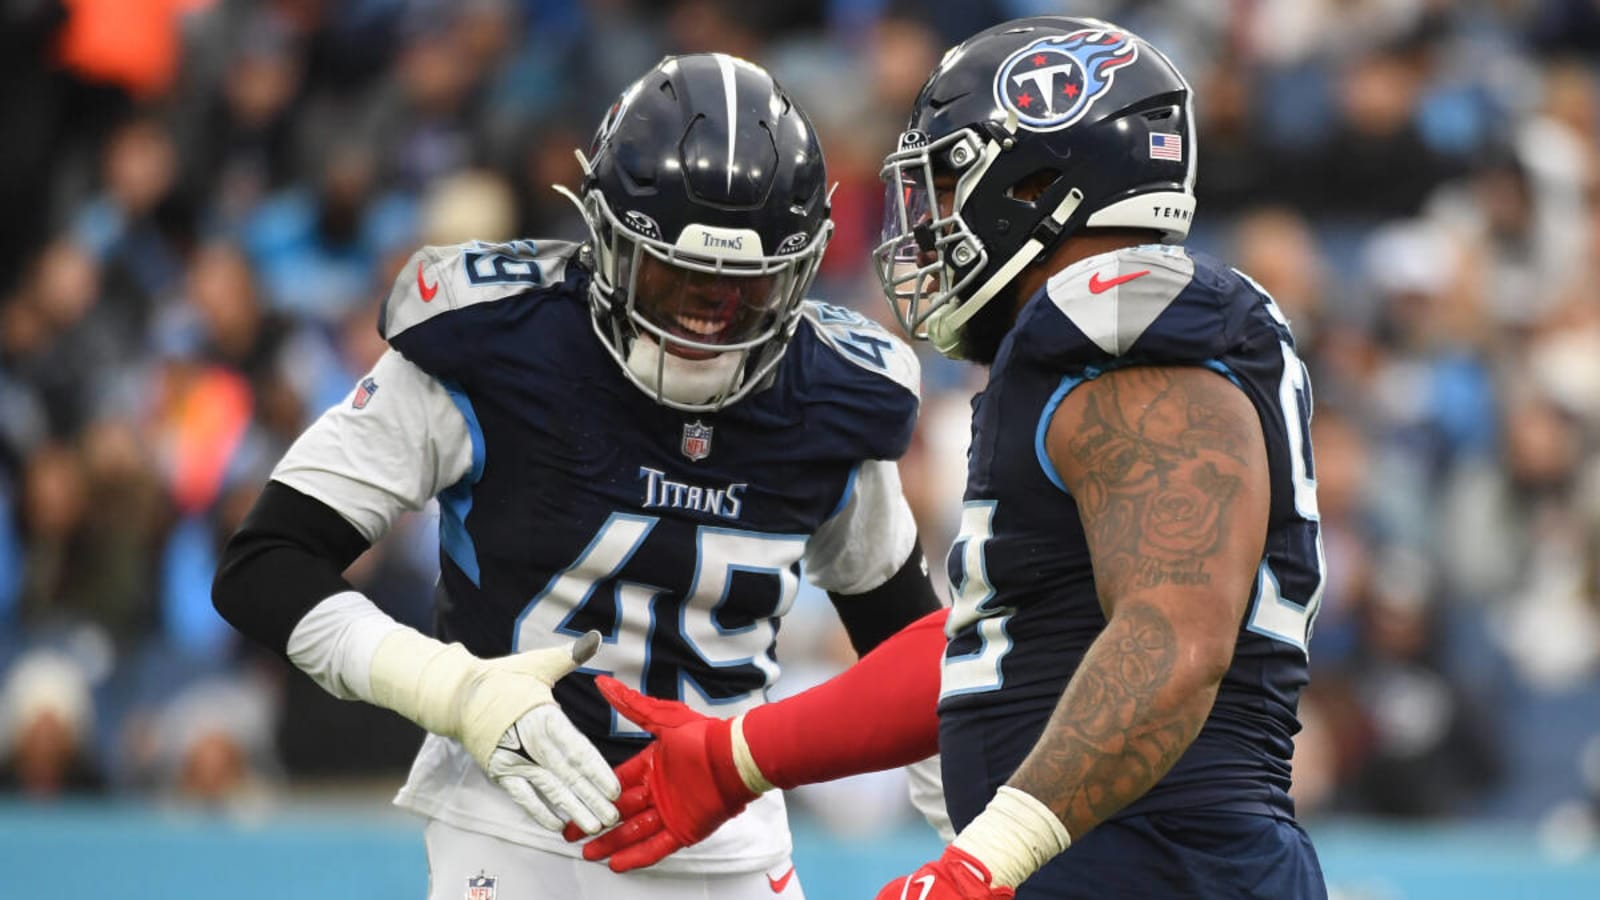 One Titans player can prove that the season isn’t over